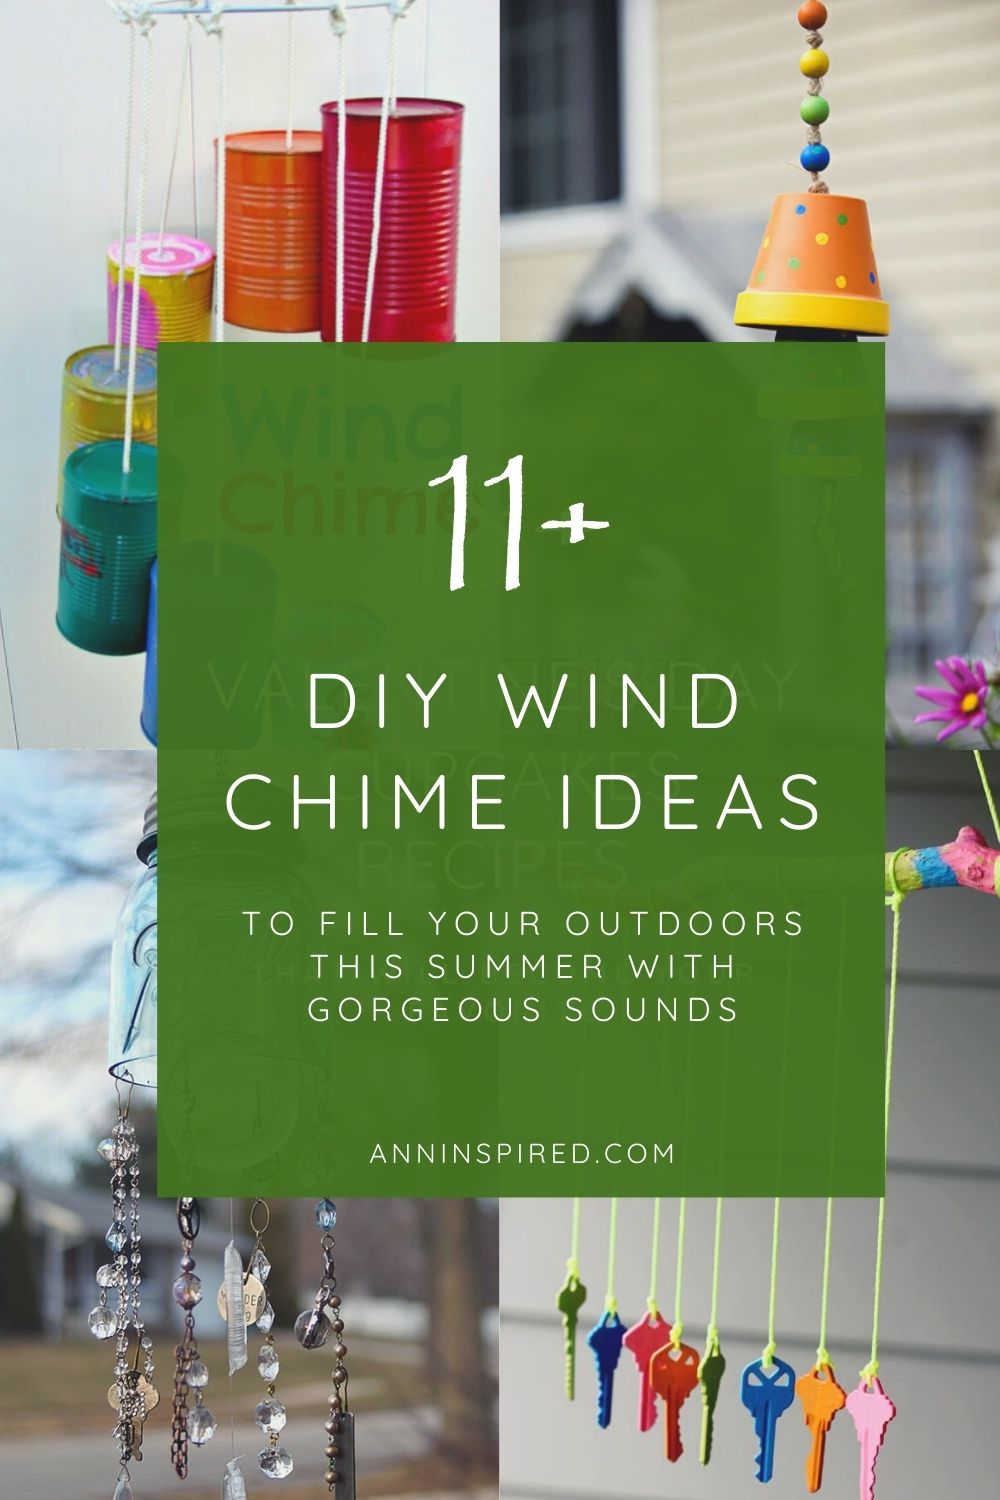 11+ DIY Wind Chime Ideas to Fill Your Outdoors This Summer with Gorgeous Sounds